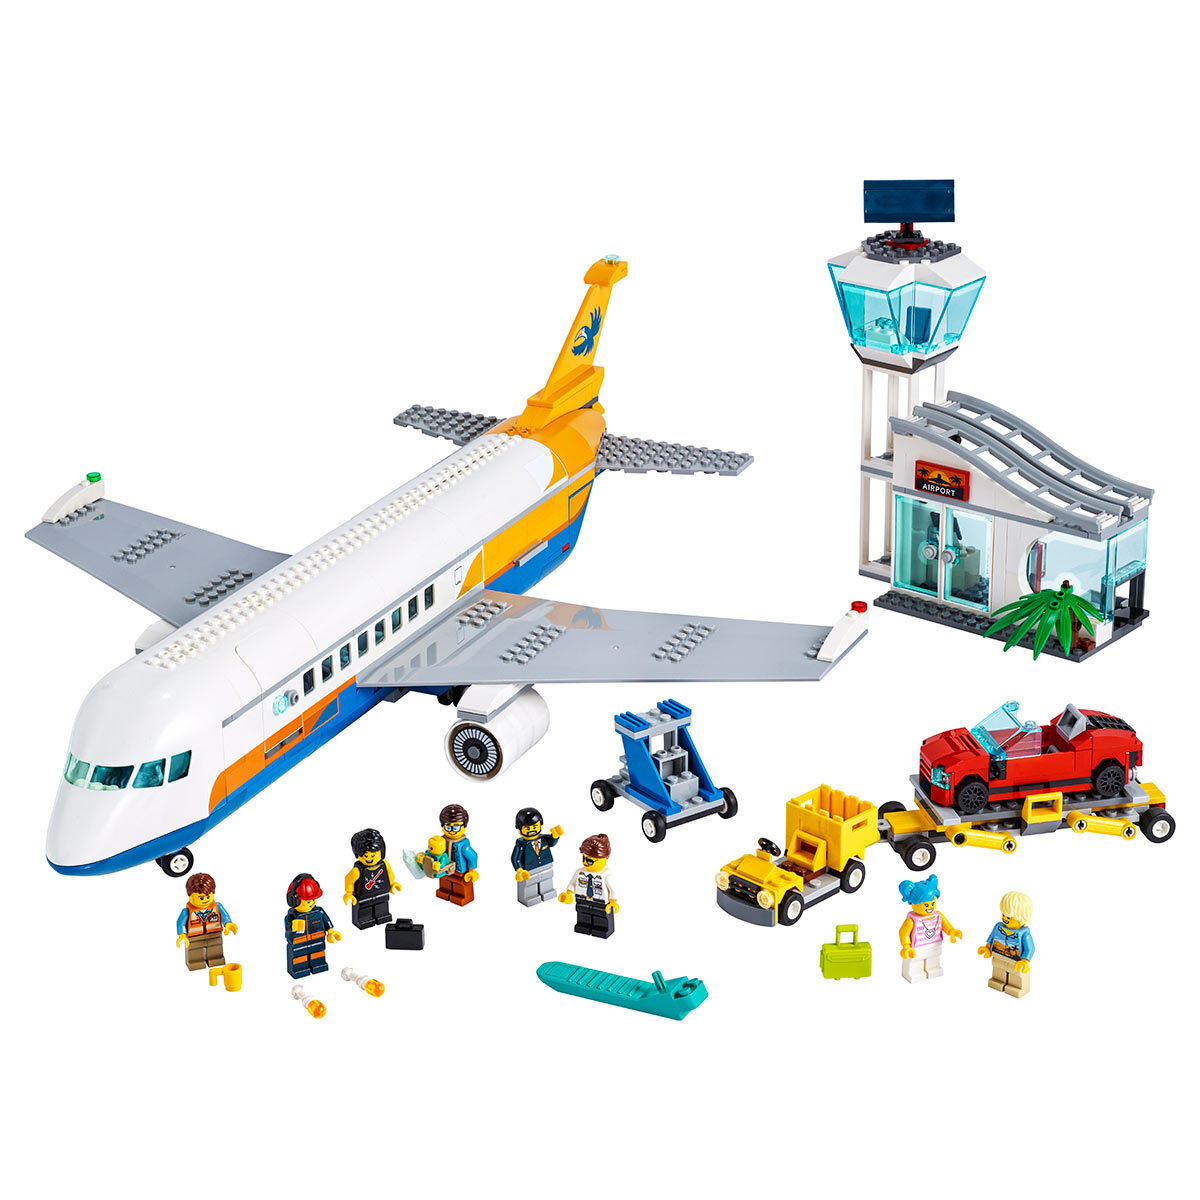 Aeroplane with Minifigure contents